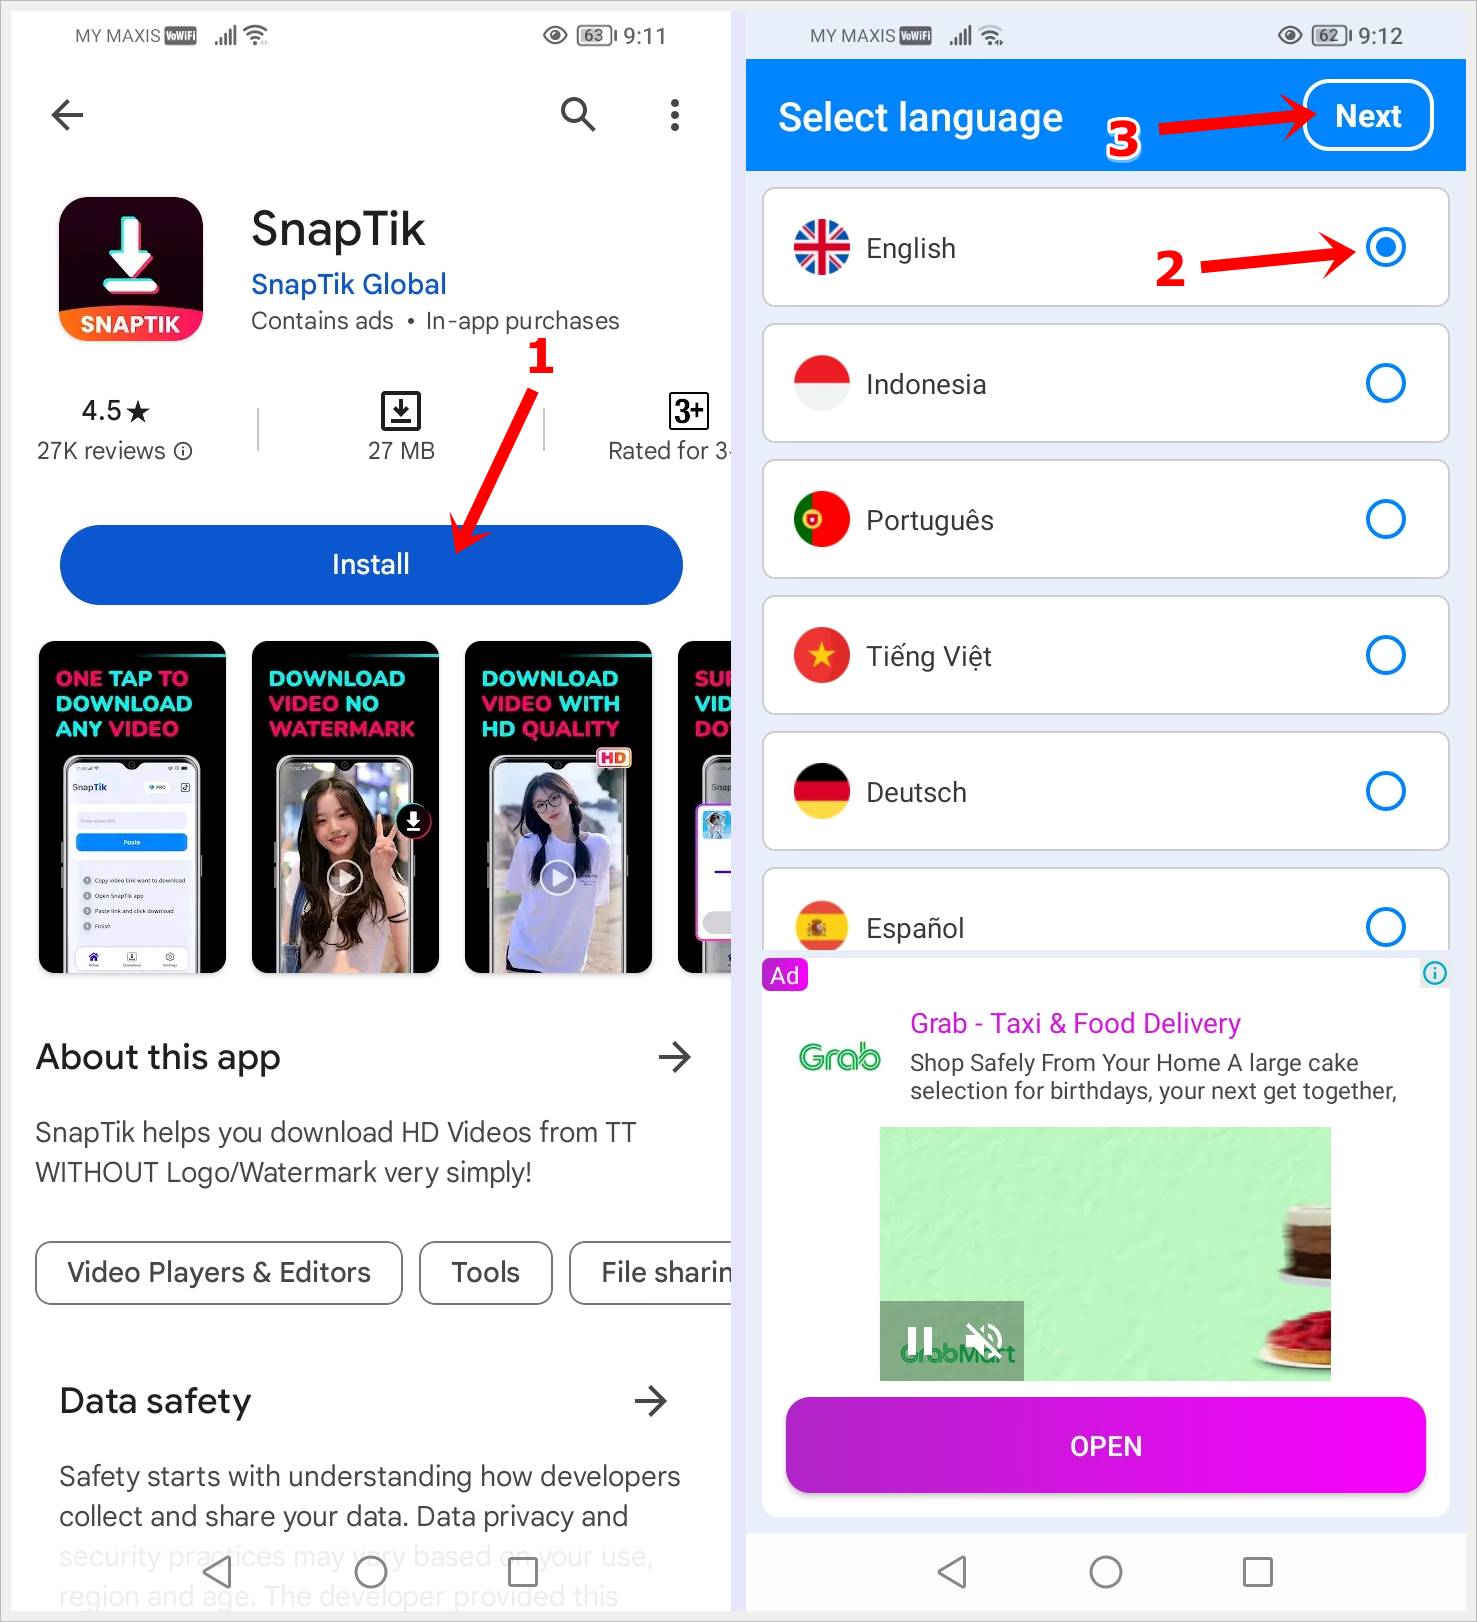 This image shows 2 different screenshots. The first featuring the SnapTik app installation page with the 'Install' button highlighted. The second shows the language selection page of the SnapTik app with English selected as the language and the 'Next' button in the top right highlighted.